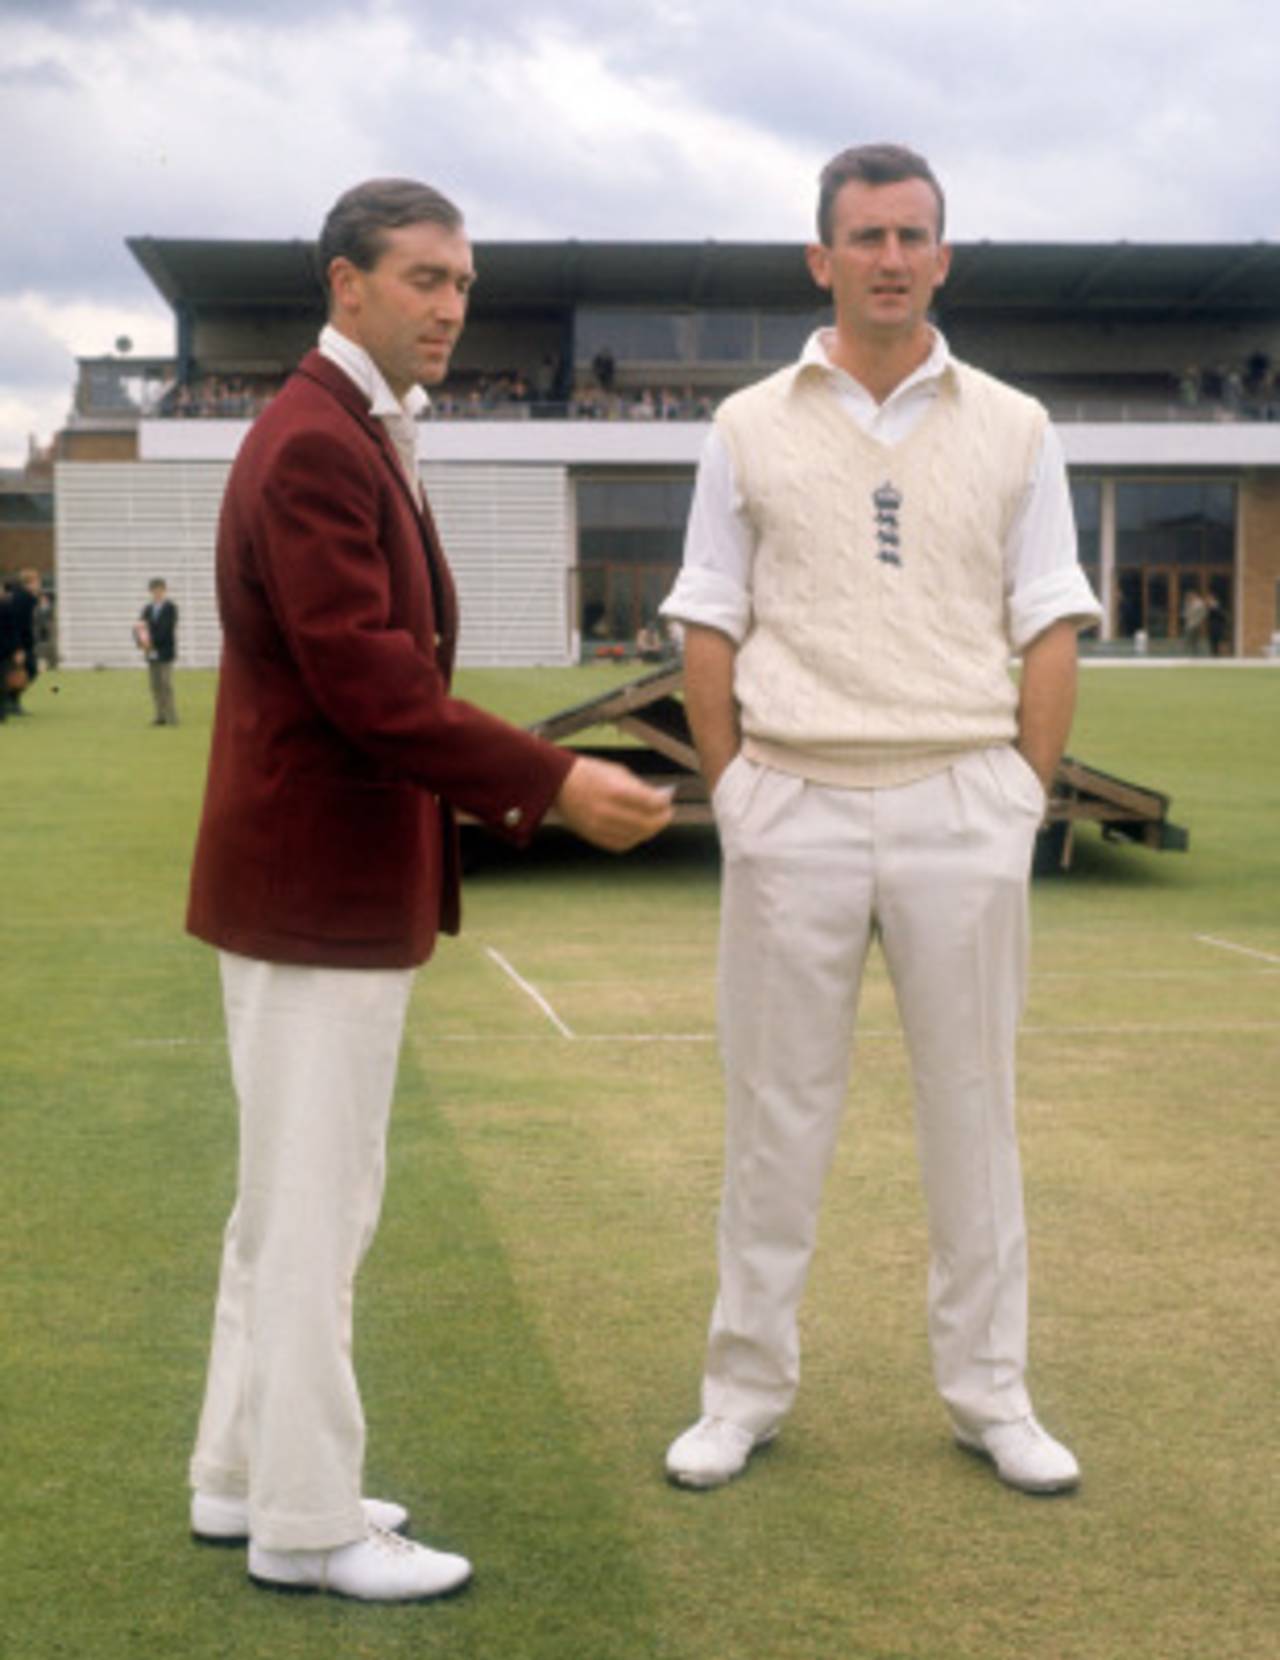 Keith Andrew and Ted Dexter prepare to toss, Northants v Sussex, Wantage Road, June 13, 1962